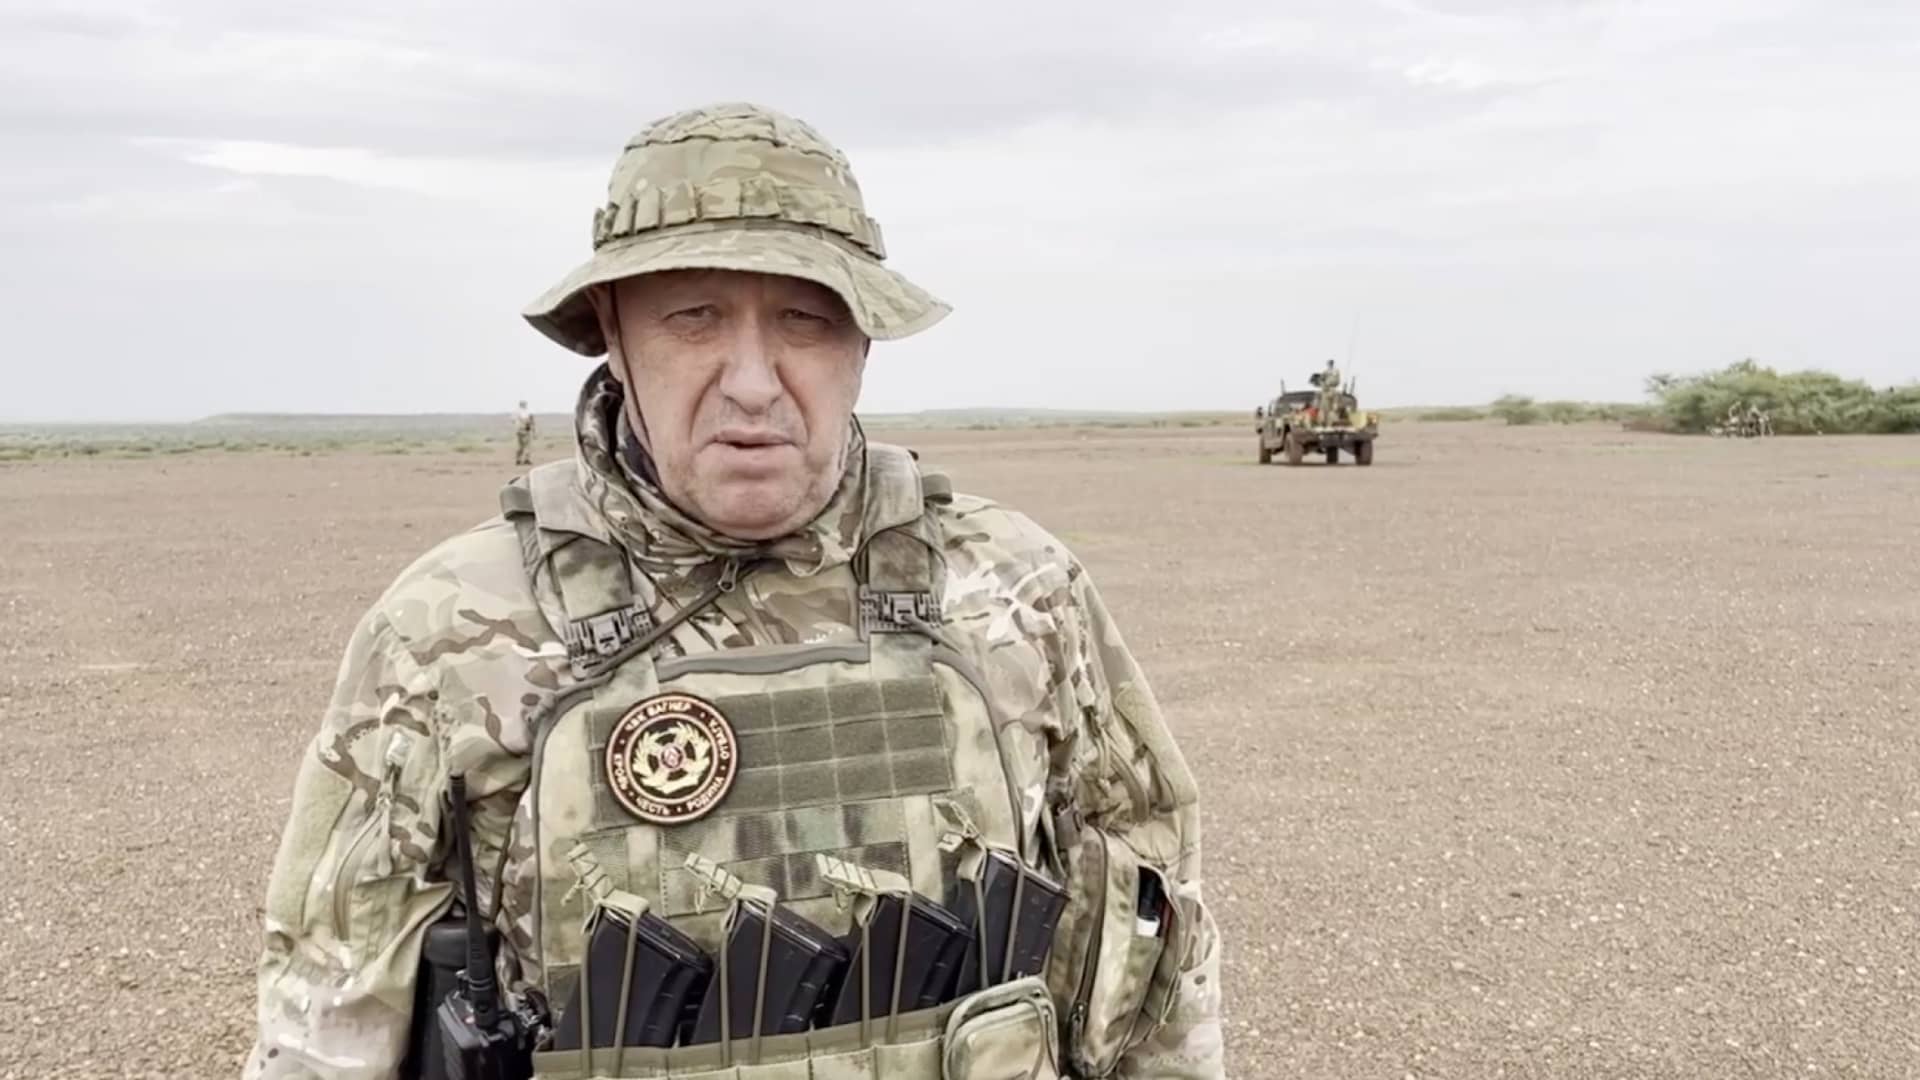 A screen grab captured from a video shared online shows Yevgeny Prigozhin, the founder of the Russian private security company Wagner, holding a rifle in a desert area while wearing camouflage in a video for the first time after his rebellion against the Russian administration in an unspecified location in Africa on August 21, 2023. In the footage shared on the Telegram channel 'Wagner's evacuation', Prigozhin stated that they have made Russia 'even greater' on all continents, including Africa. 